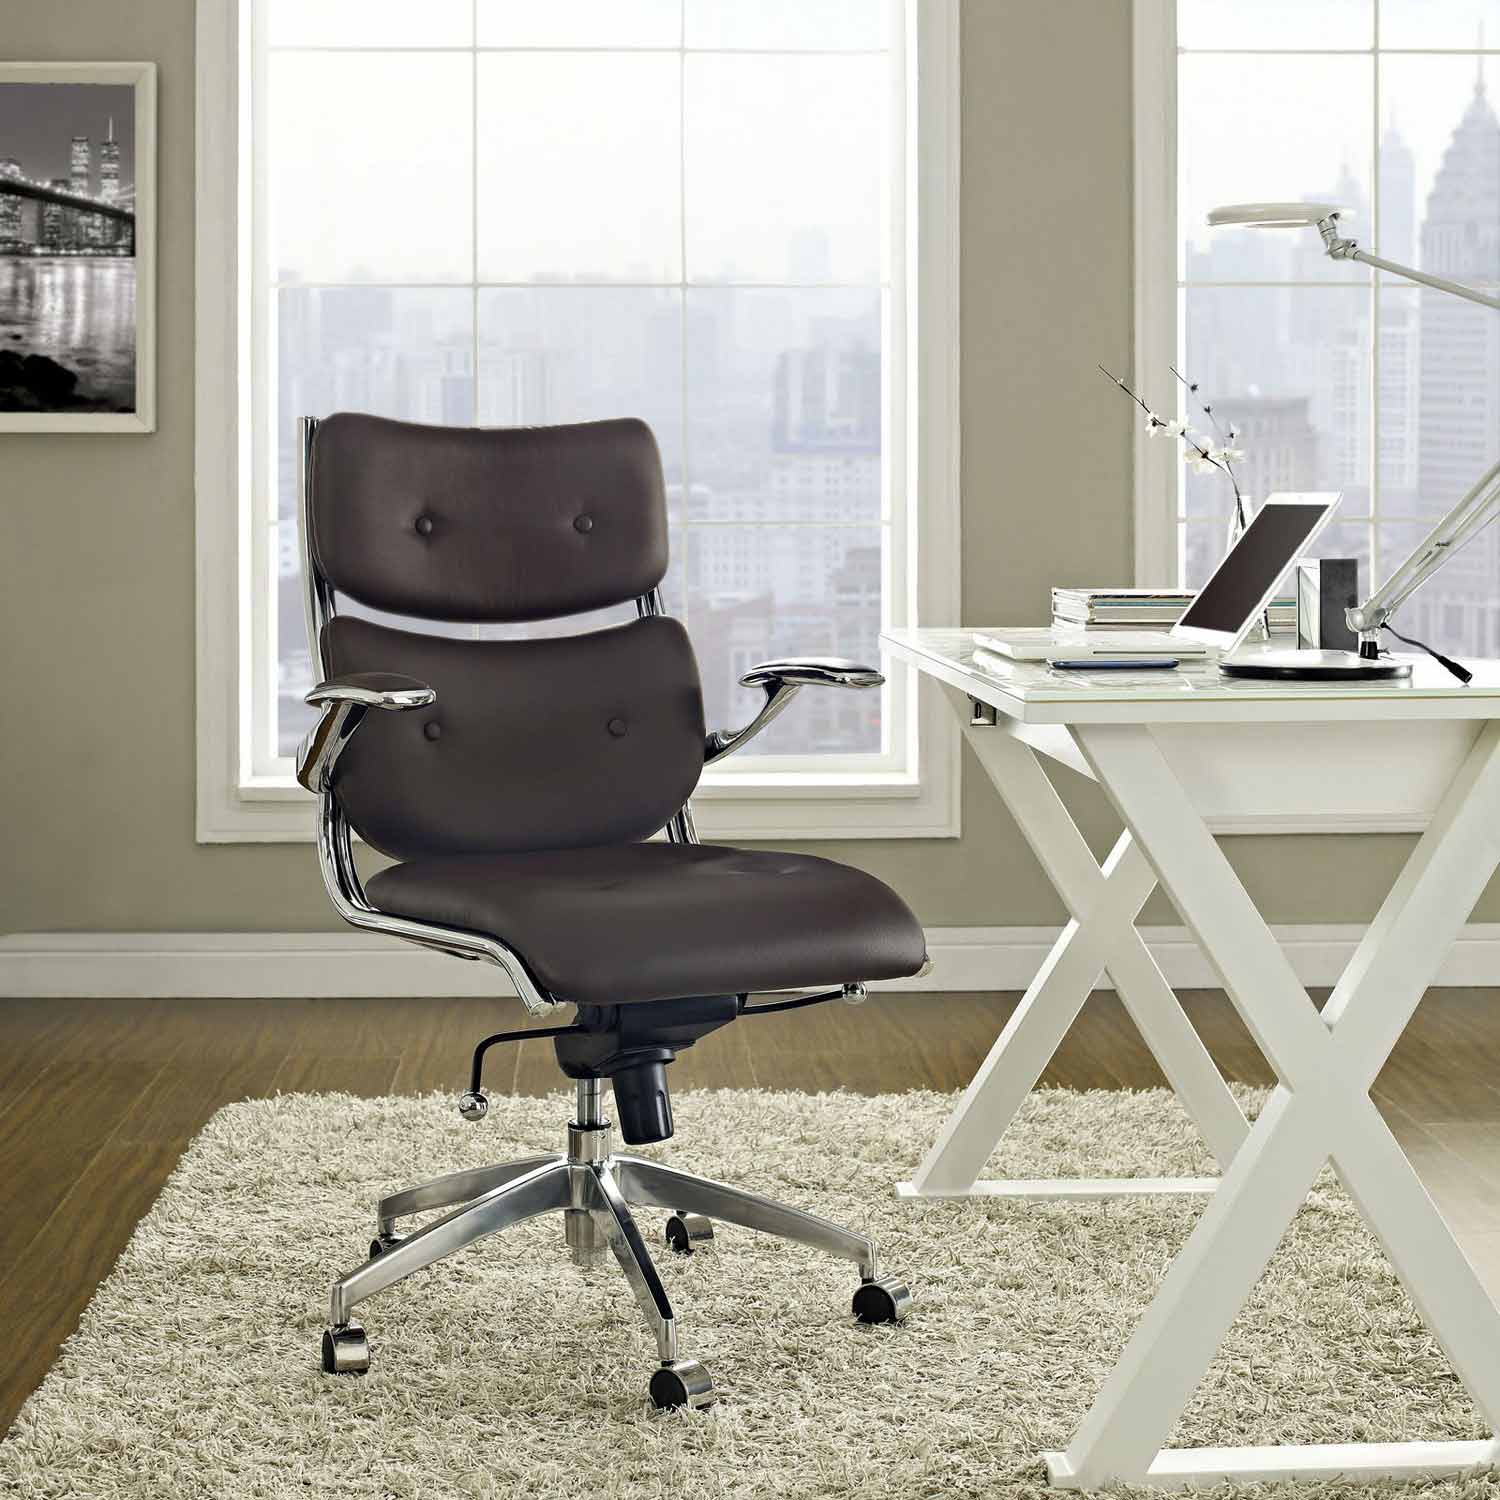 Modway Push Mid Back Office Chair - Brown